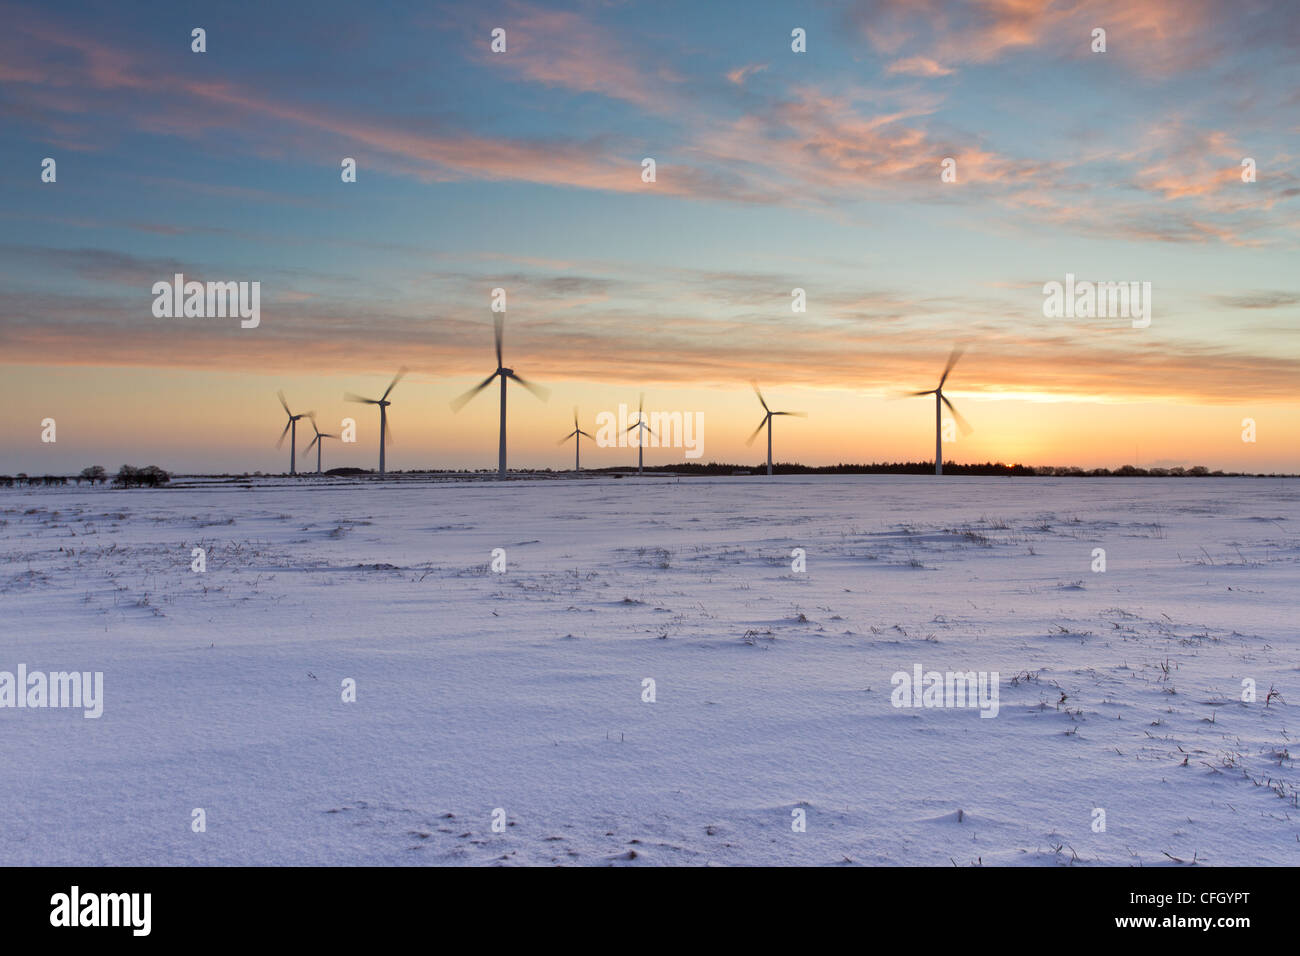 The dawn of a new energy source - Knabs Ridge wind farm in North Yorkshire Stock Photo